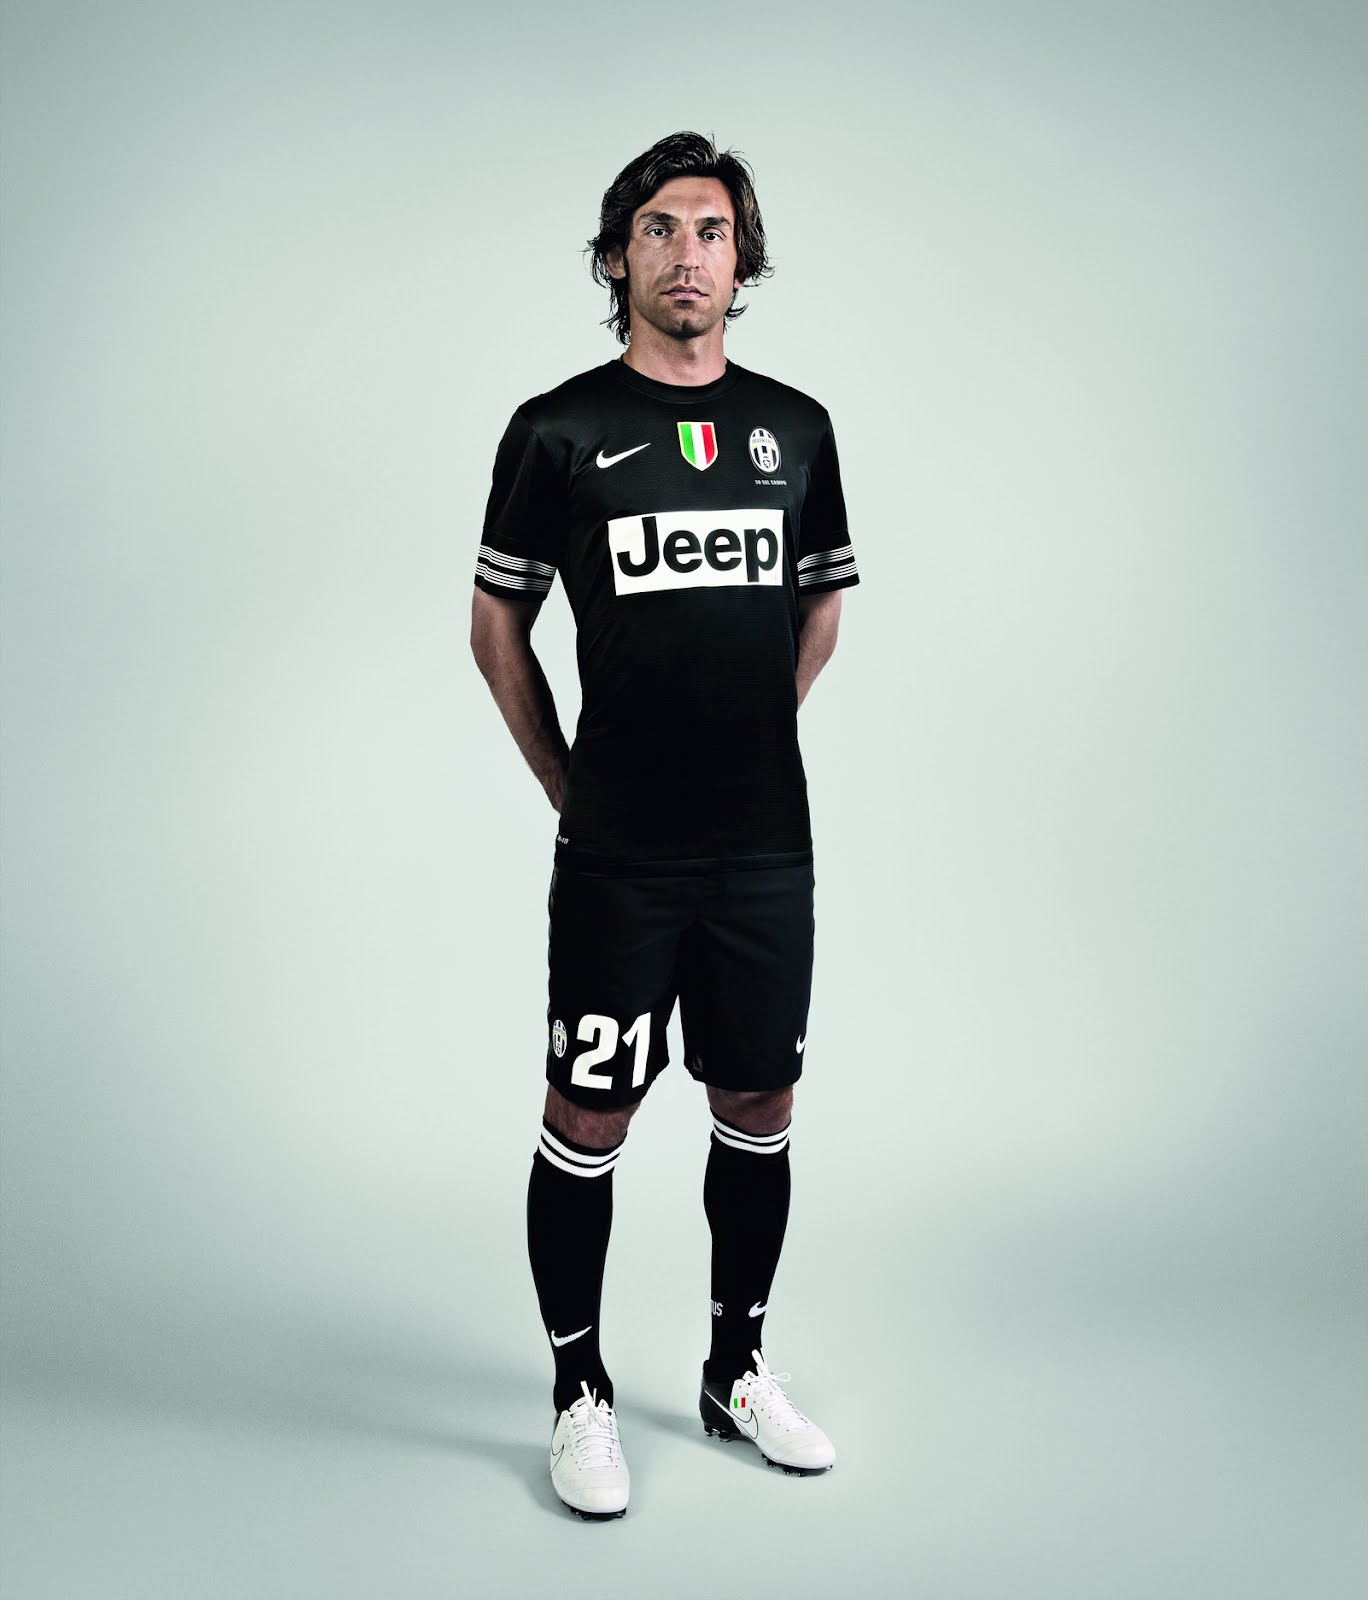 Juventus Receive New Team Jerseys To Celebrate The Jeep Avenger  Southern  Norfolk Airport Dodge Chrysler Jeep Ram FIAT Juventus Receive New Team  Jerseys To Celebrate The Jeep Avenger